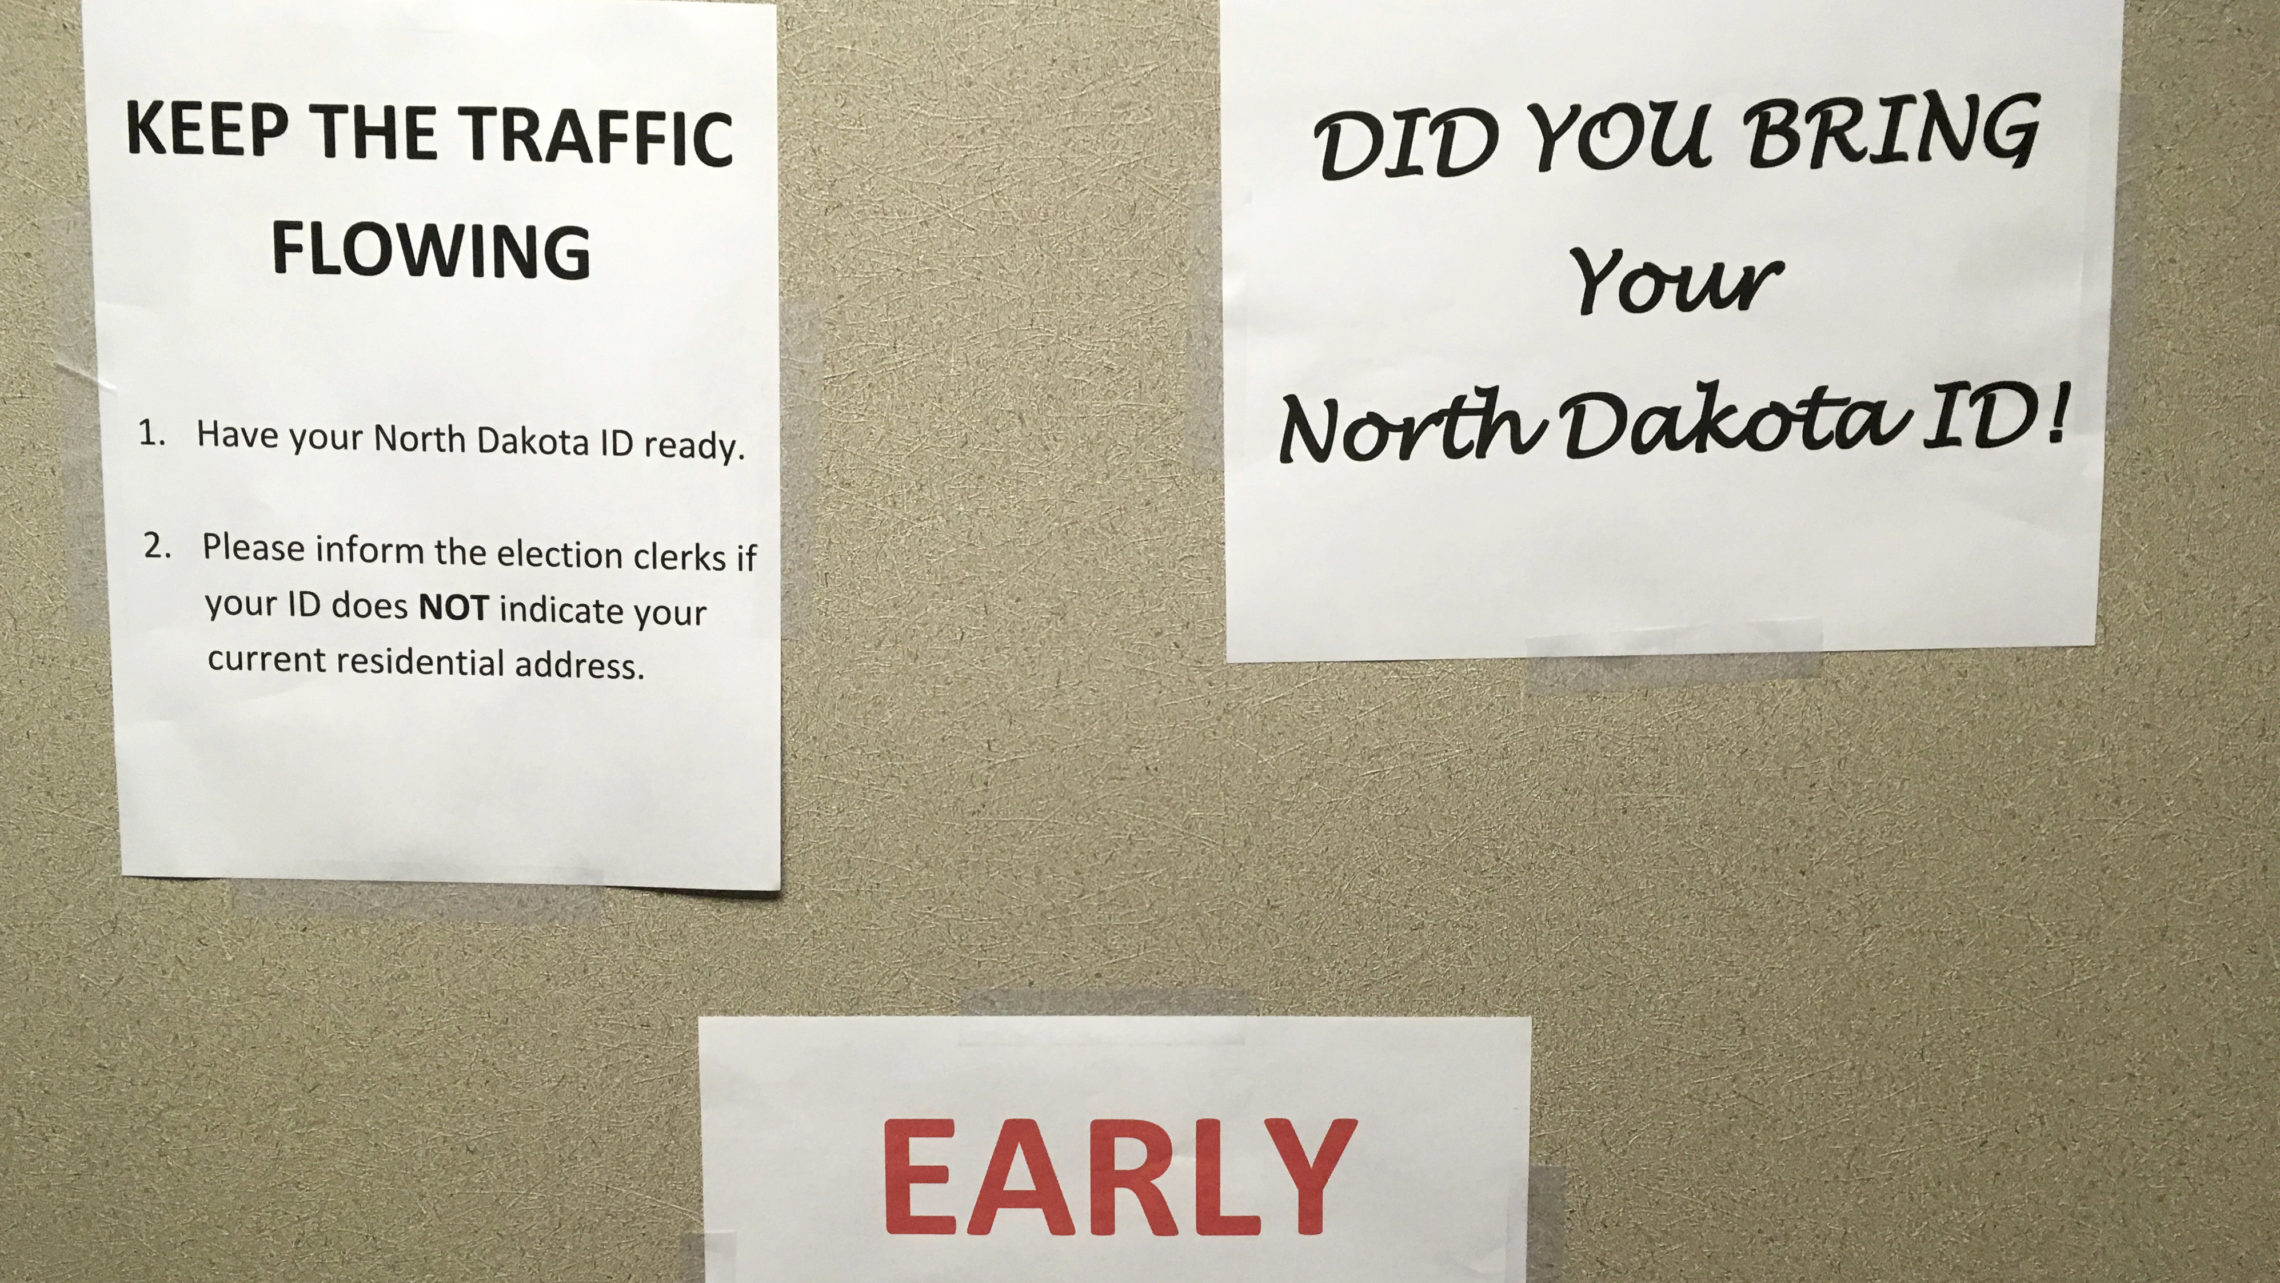 This June, instructions were posted at an early voting precinct in Bismarck, N.D. In that primary election, tribal IDs that did not show residential addresses were accepted as voter ID. But those same IDs will not be accepted in the general election. CREDIT: James MacPherson/AP